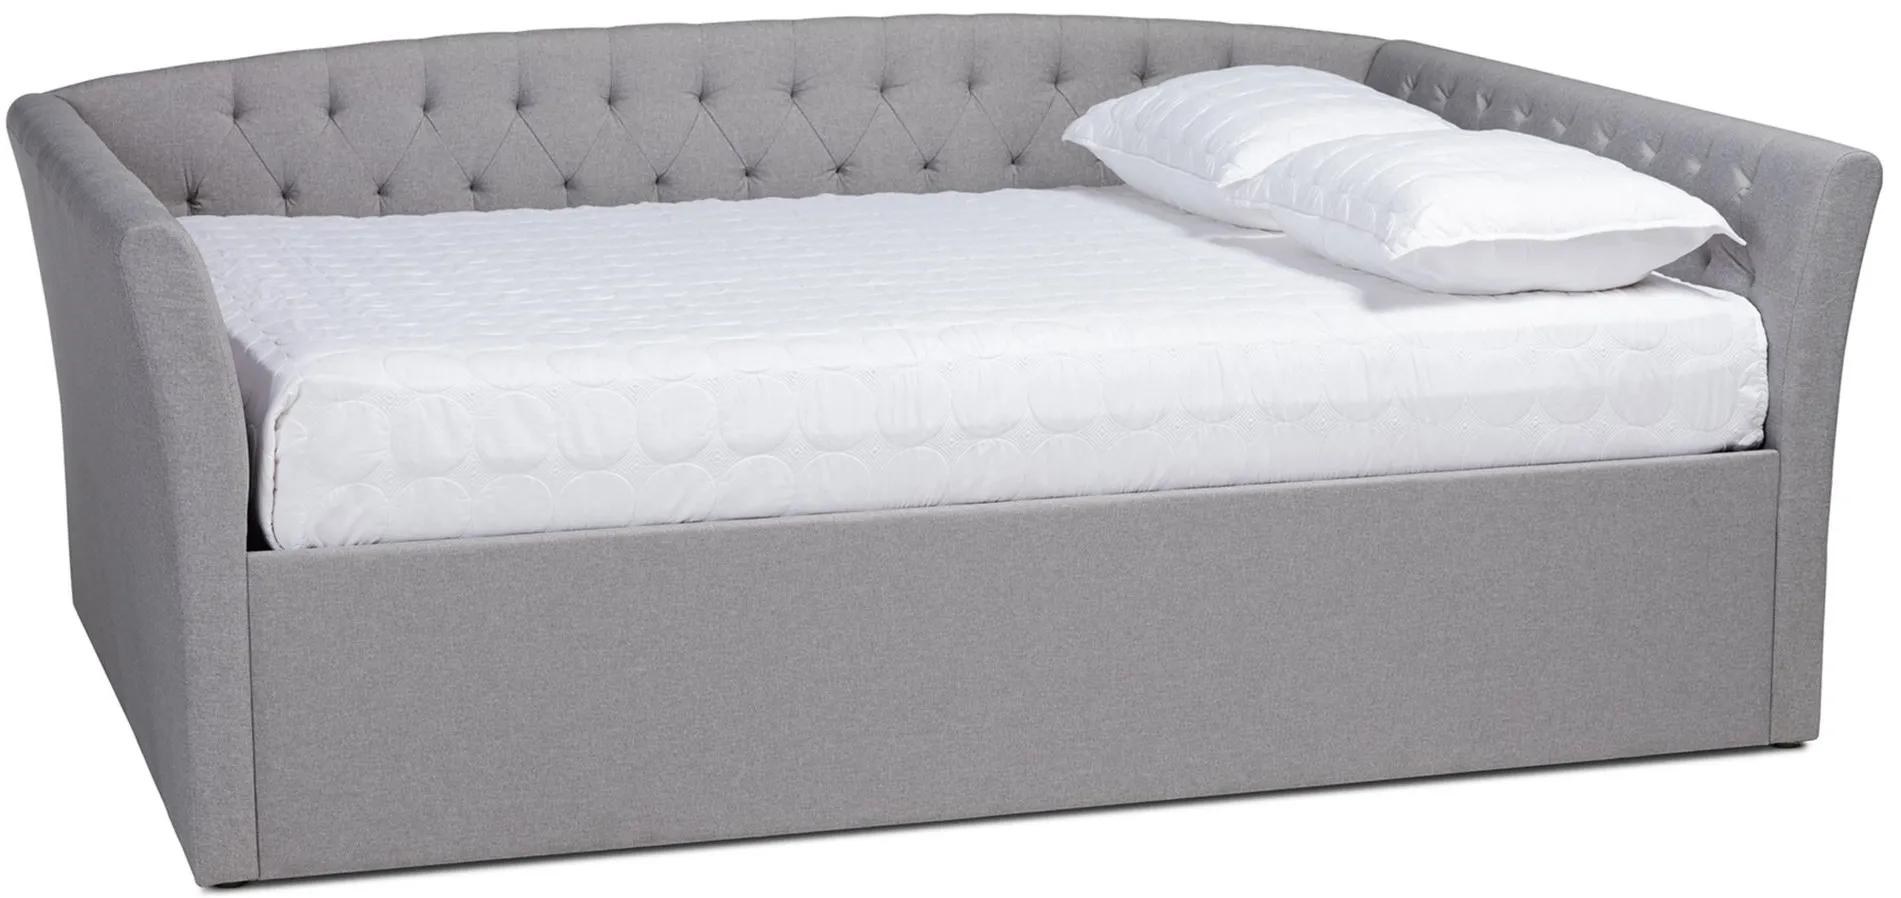 Delora Daybed in Light Gray by Wholesale Interiors